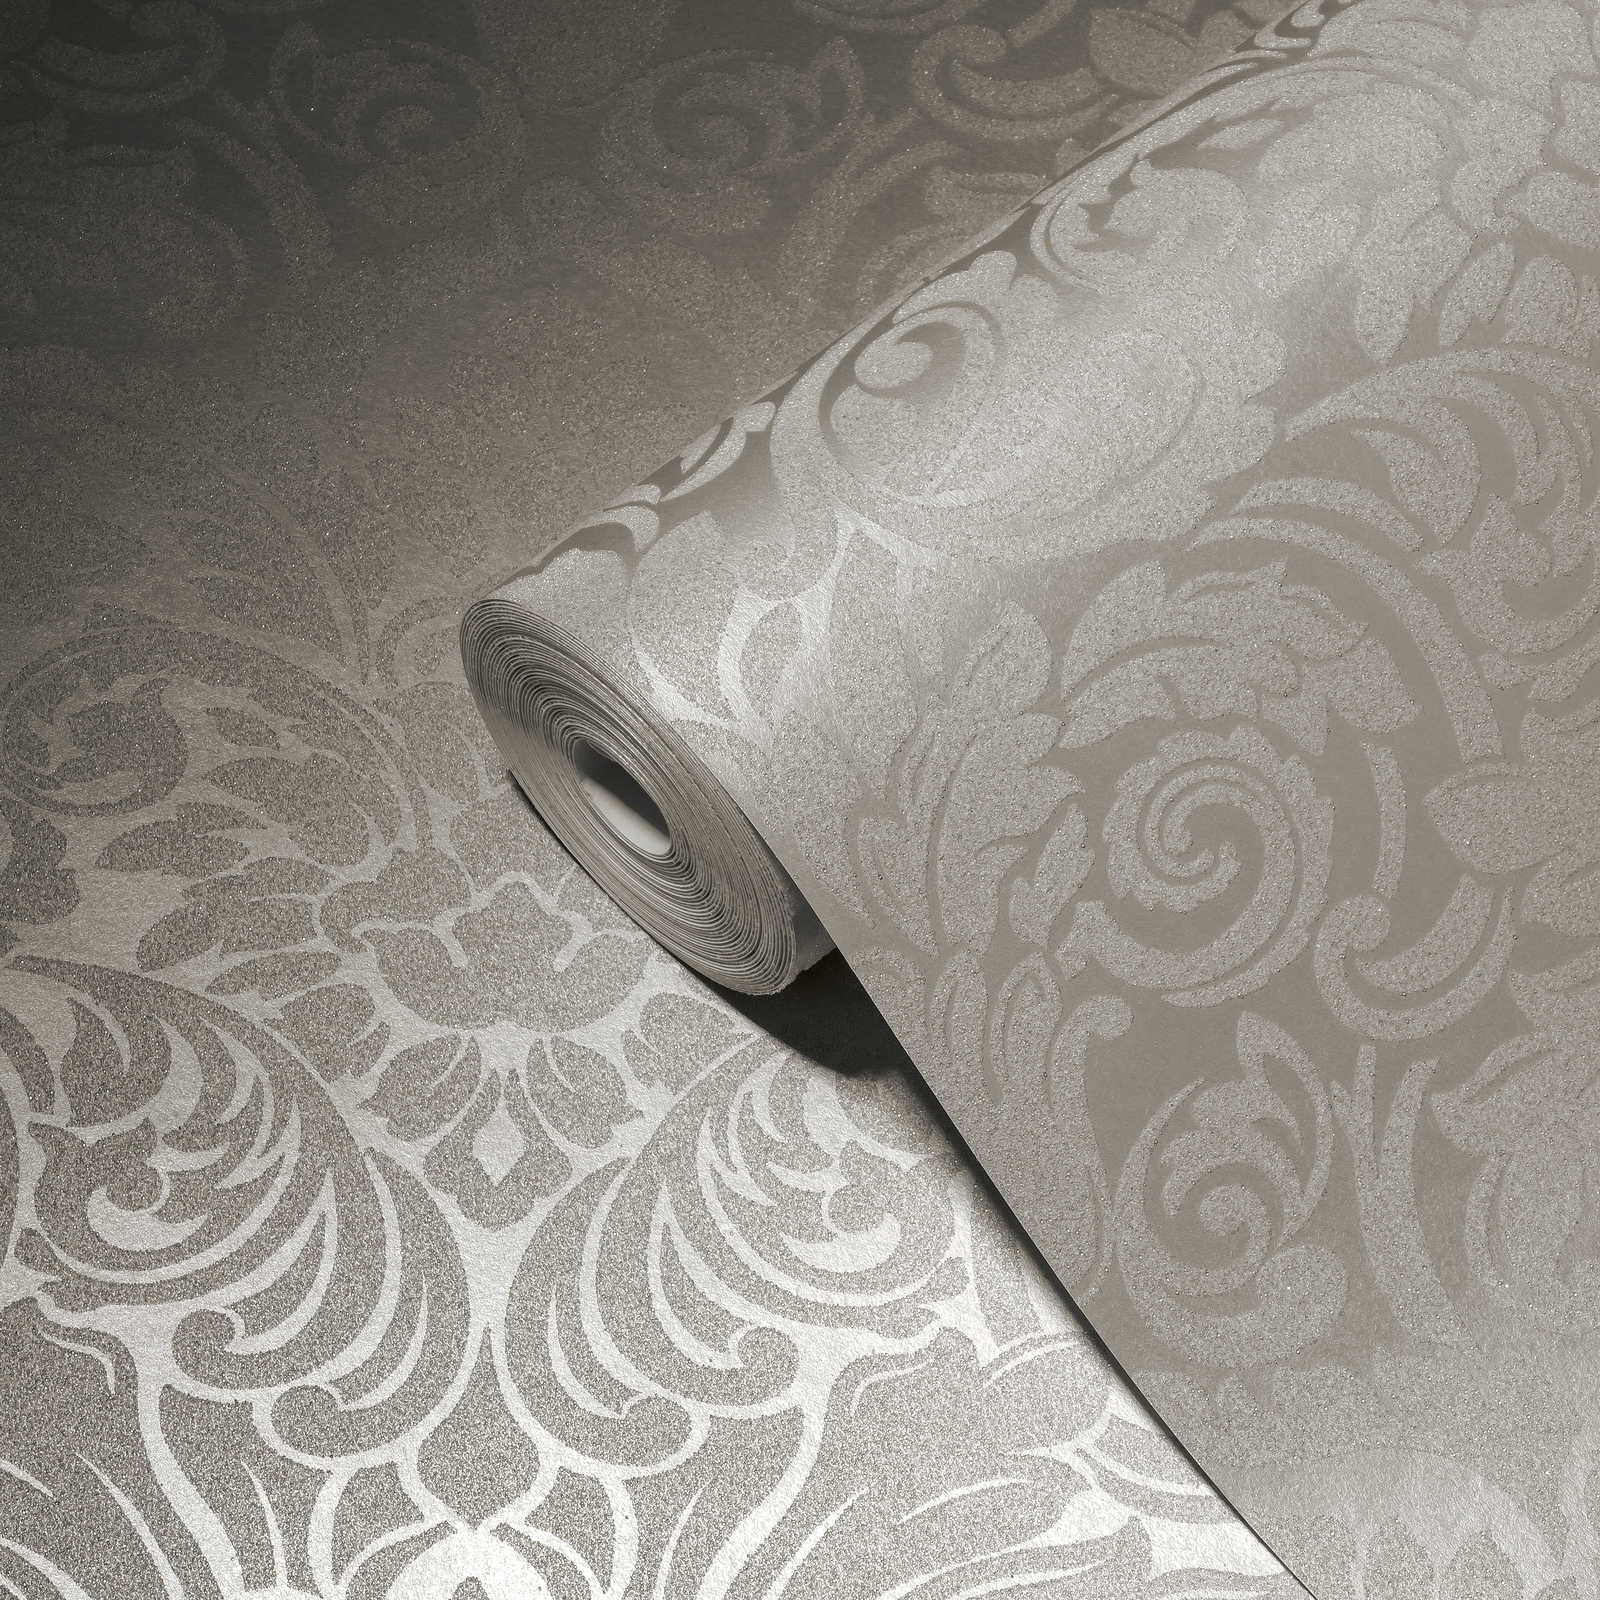             Ornamental wallpaper with metallic effect and floral design - silver, cream
        